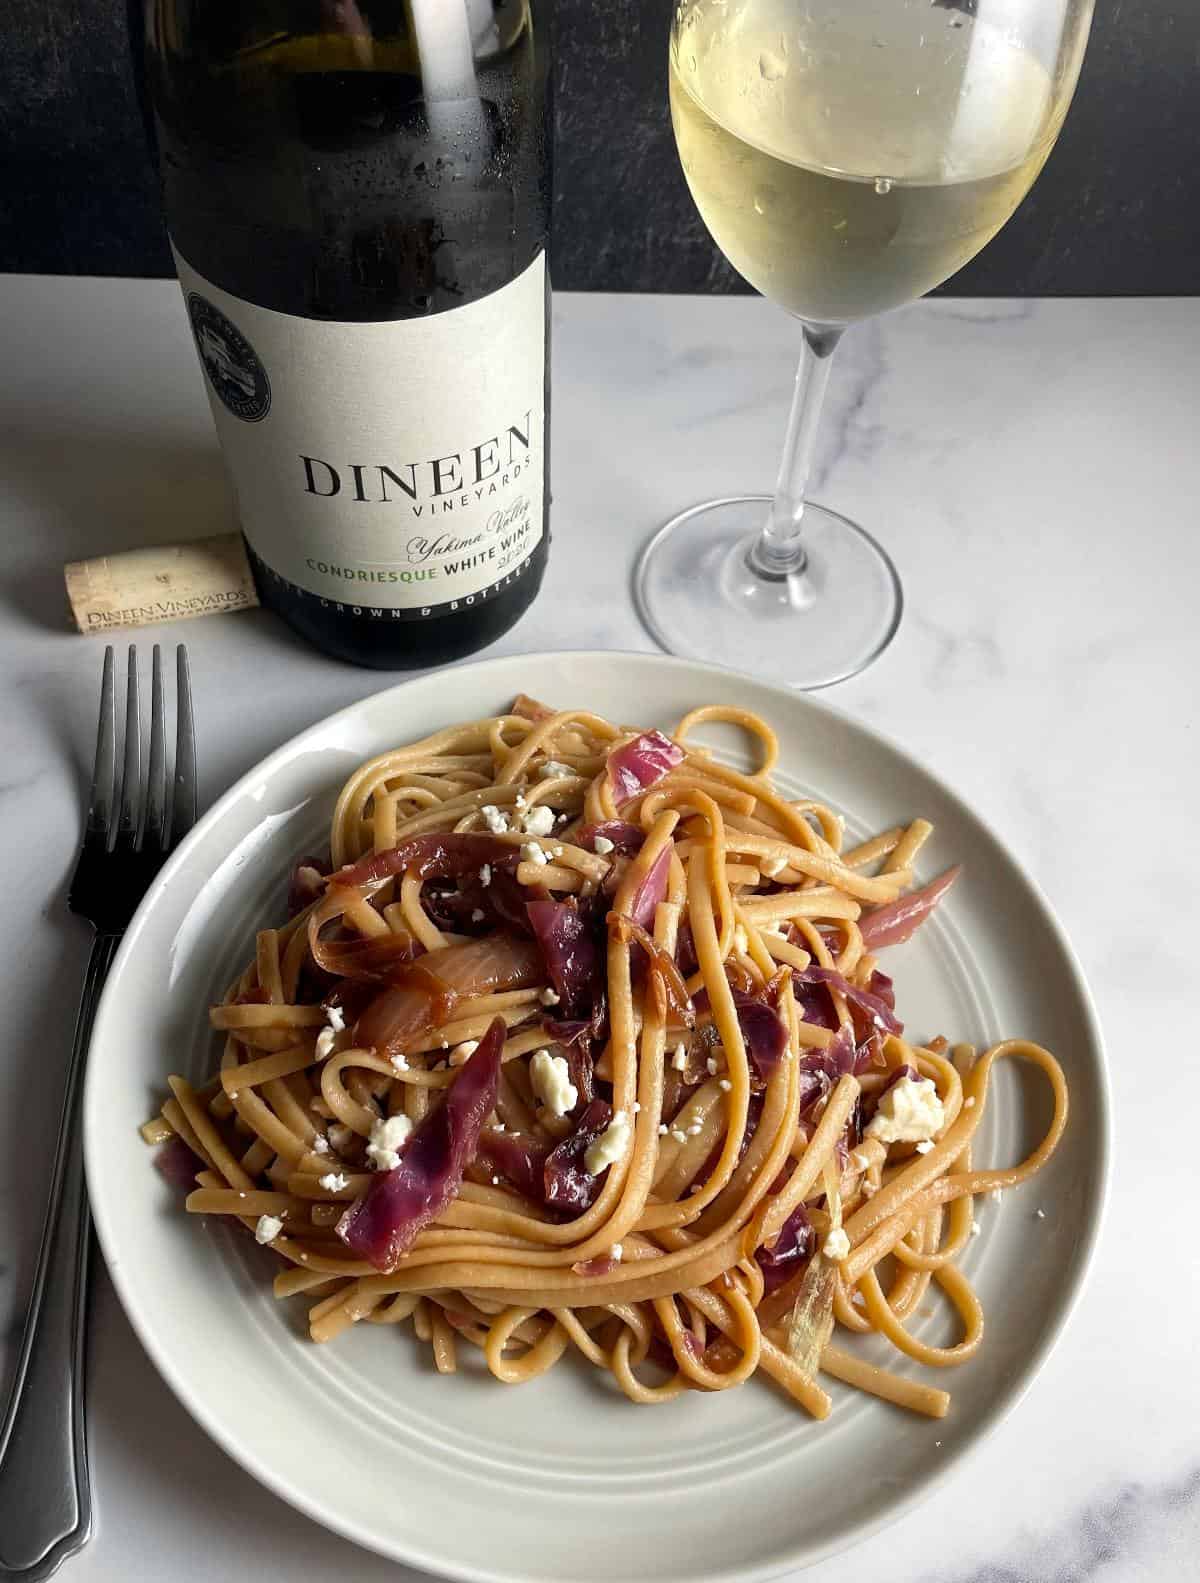 red cabbage linguine plated and served with Dineen Vineyard Condriesque white wine blend.